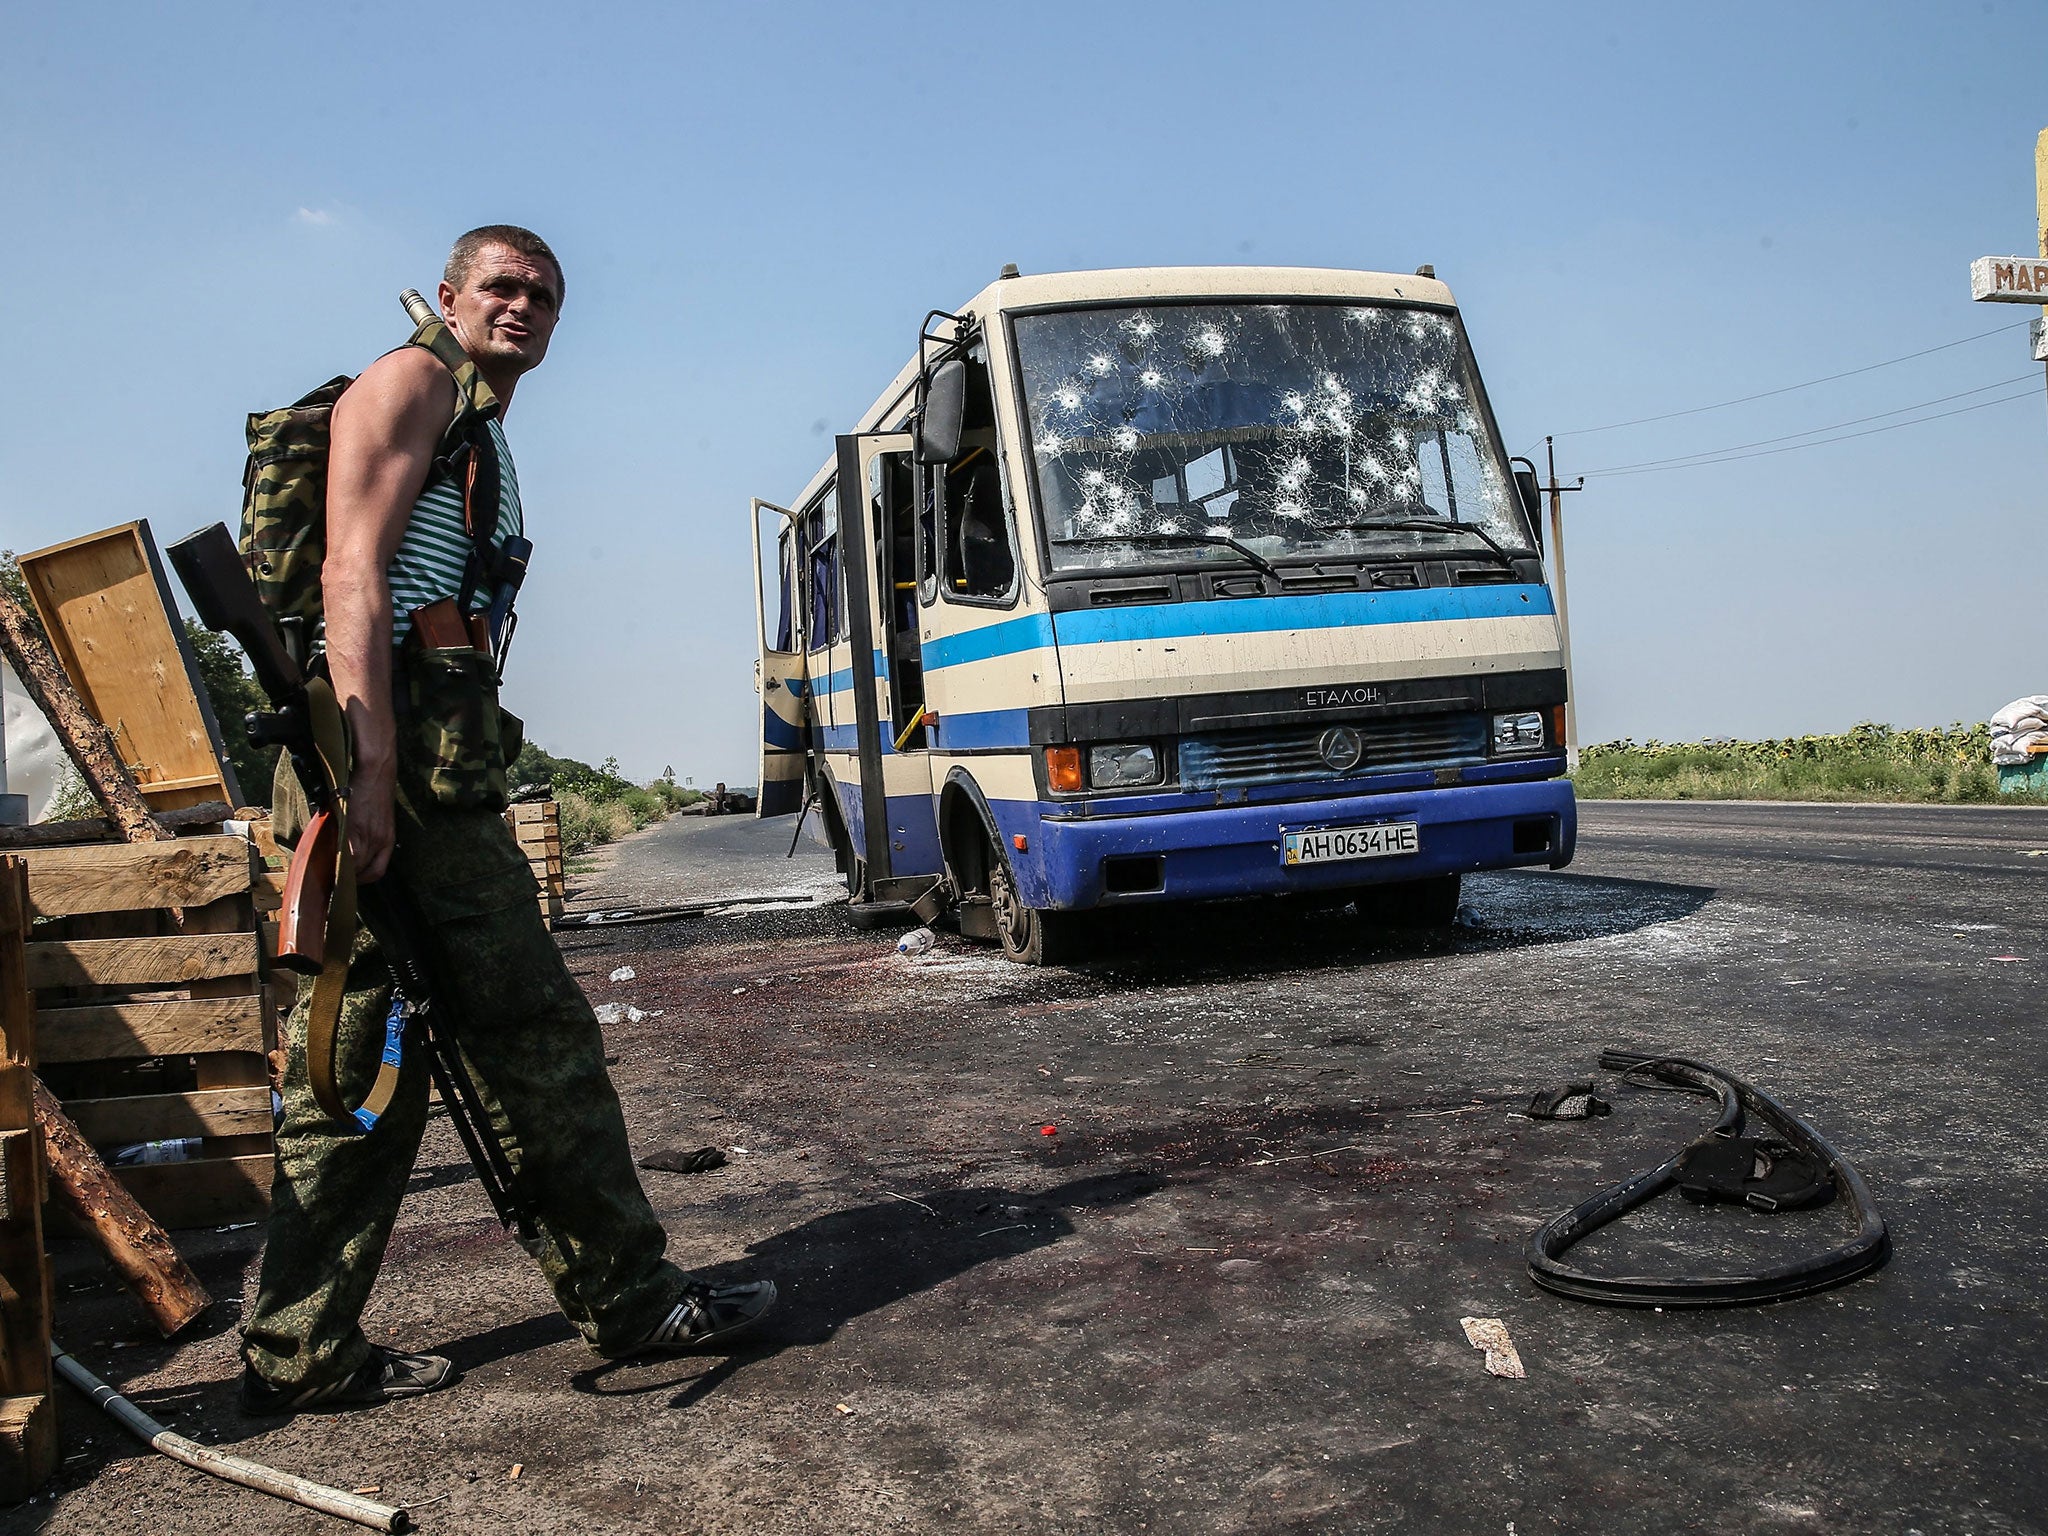 An armed pro-Russian separatist stands near the Ukrainian government-allied Right Sector’s bus that was ambushed in Donetsk yesterday. At least 12 people were killed in the attack